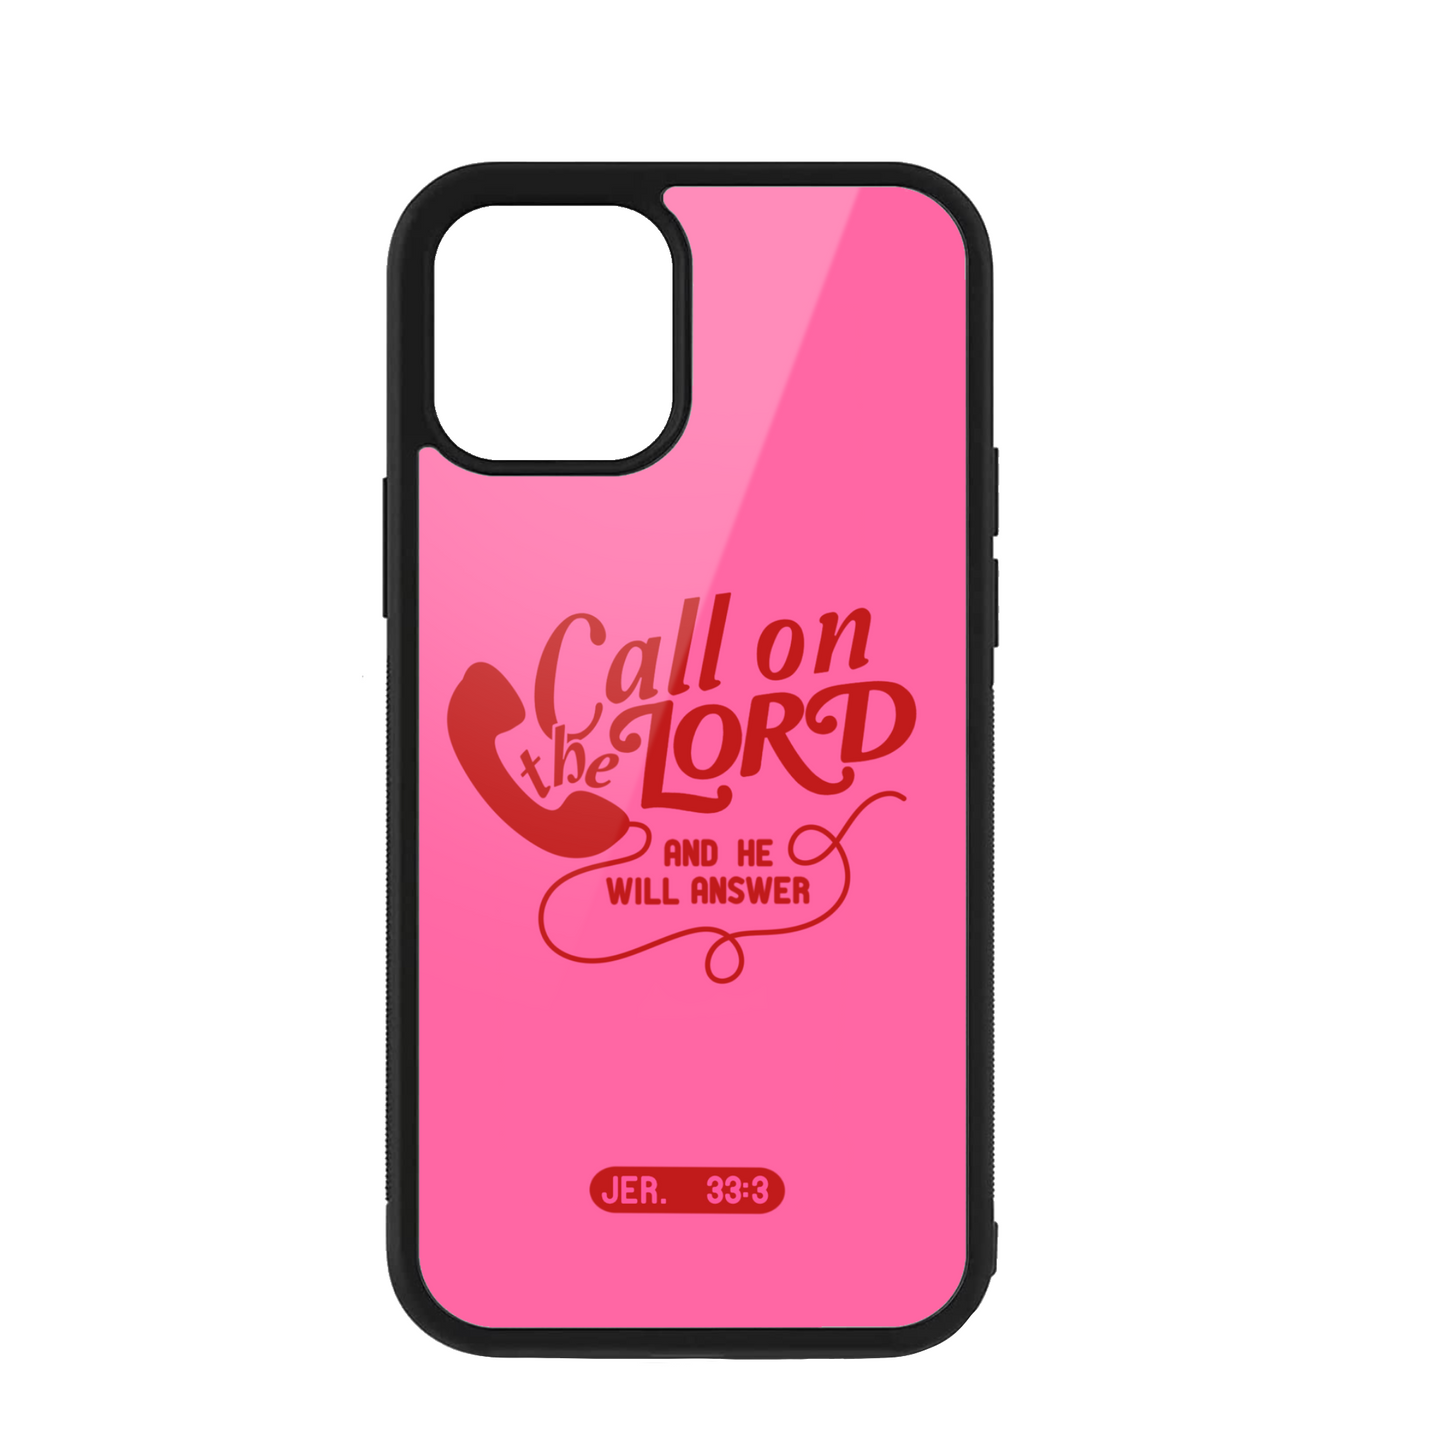 Call on the Lord Phone Case